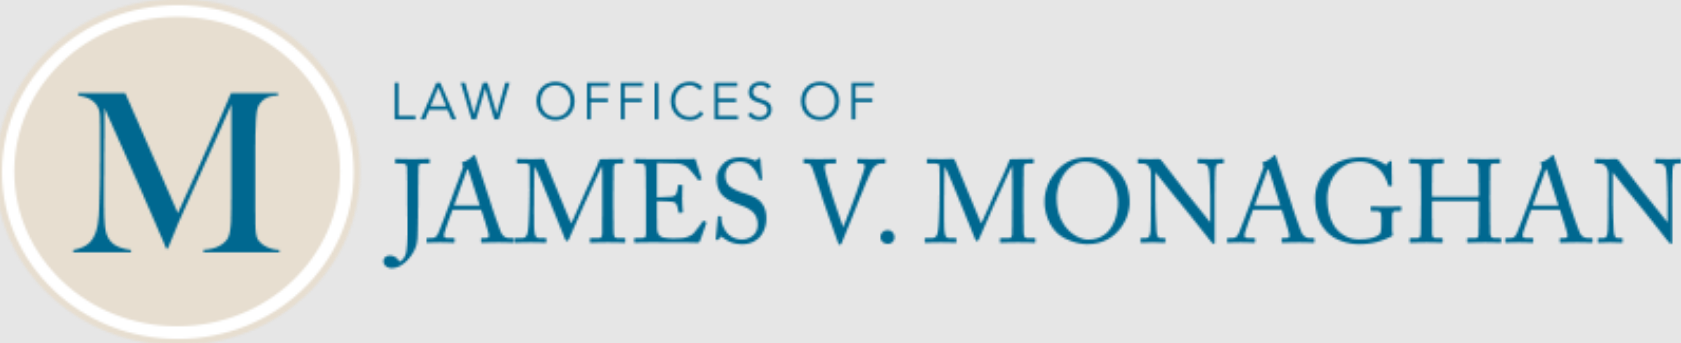 Law Offices of James V. Monaghan Outlines Reasons for Hiring a Personal Injury Attorney